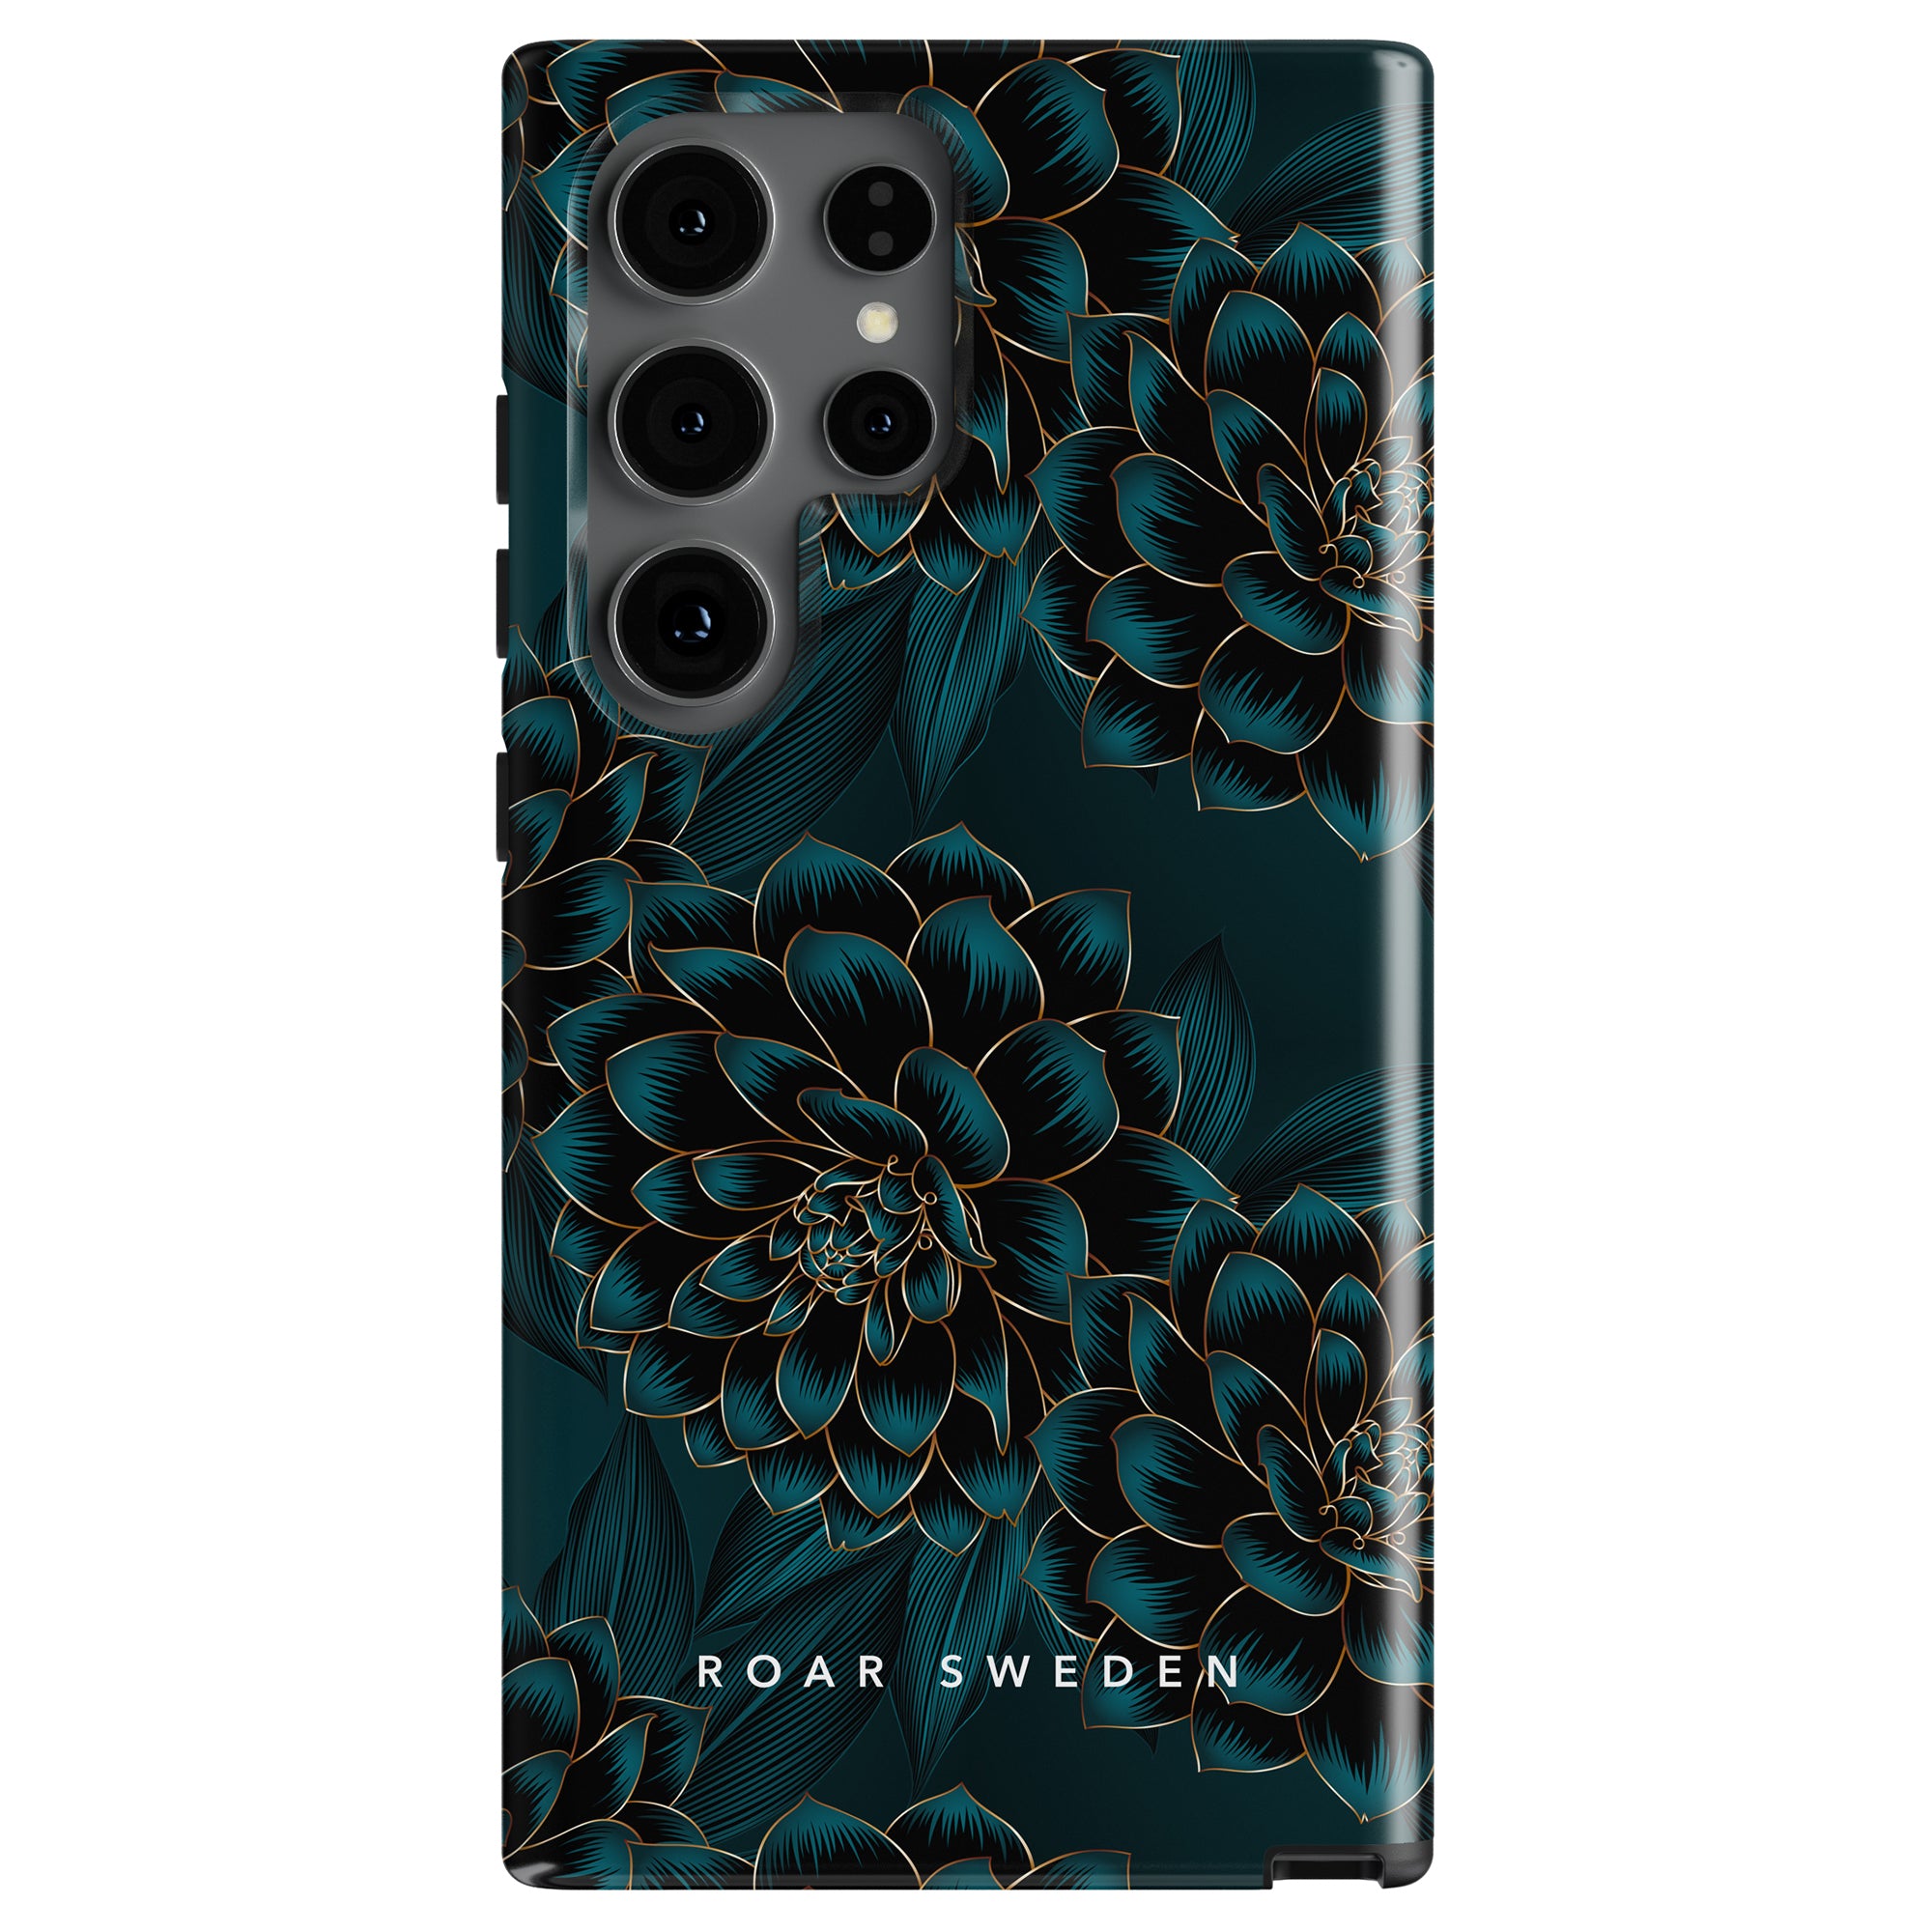 A smartphone with a dark floral patterned Petrol - Tough Case displaying the brand name "Roar Sweden" at the bottom.